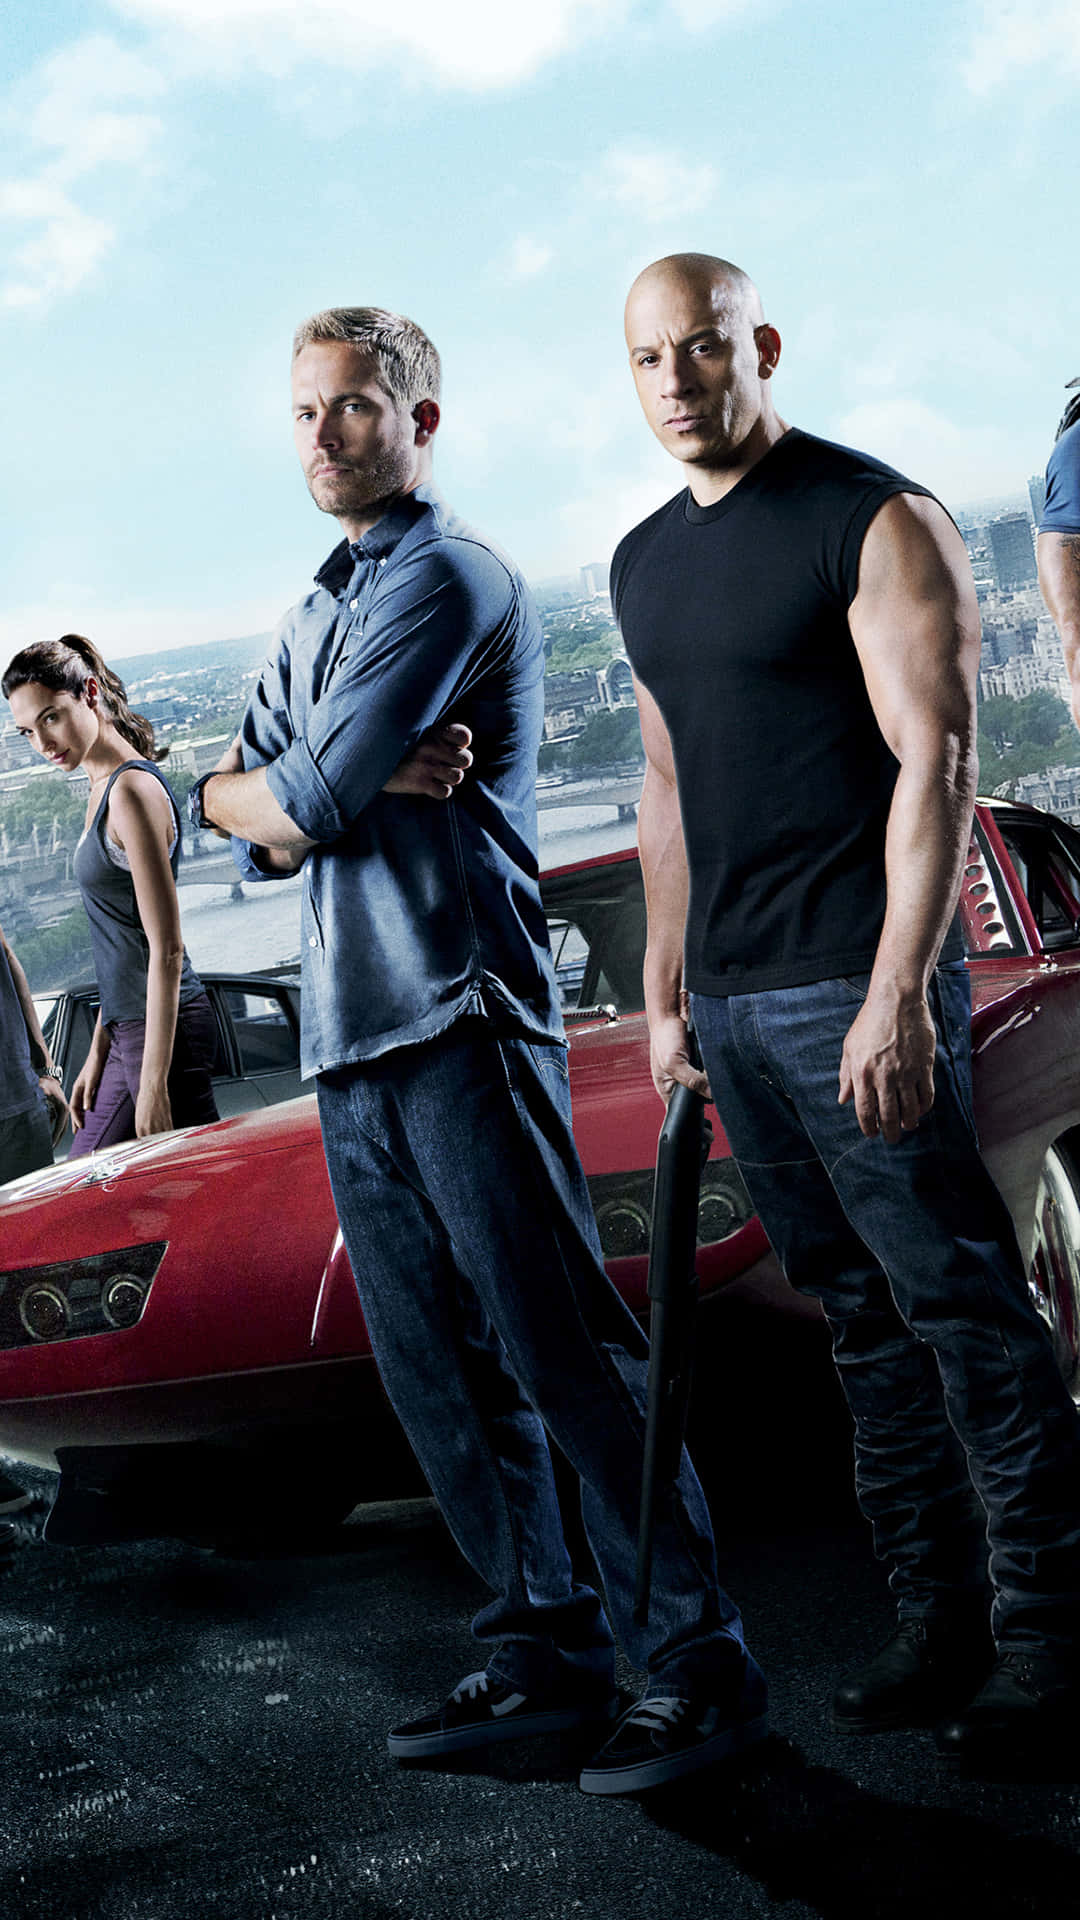 The Fast And The Furious Movie Poster Wallpaper